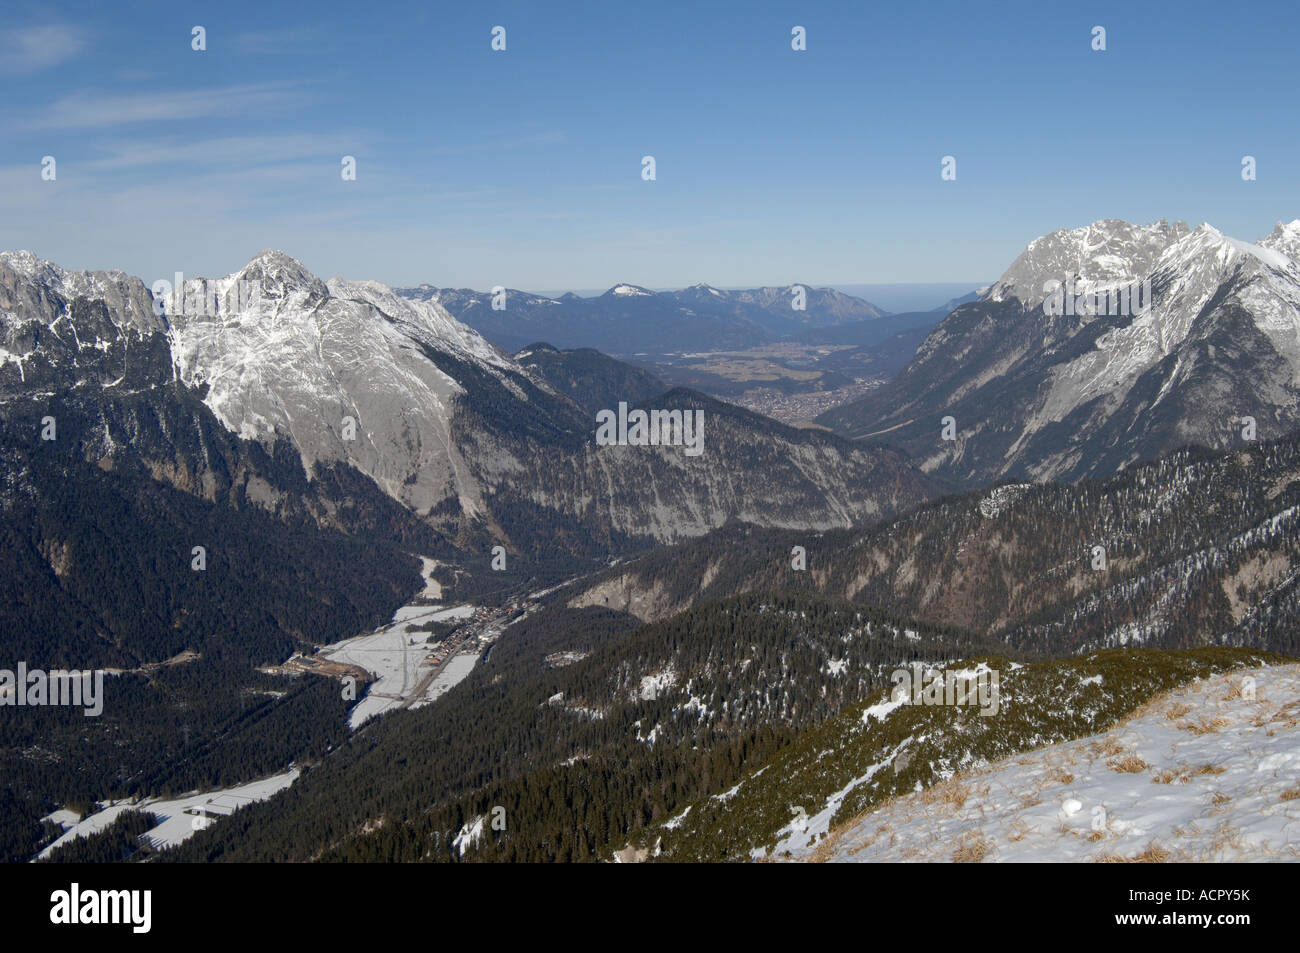 Snowy mountain scene in the Austrian Tyrol in February looking towards the valley Stock Photo